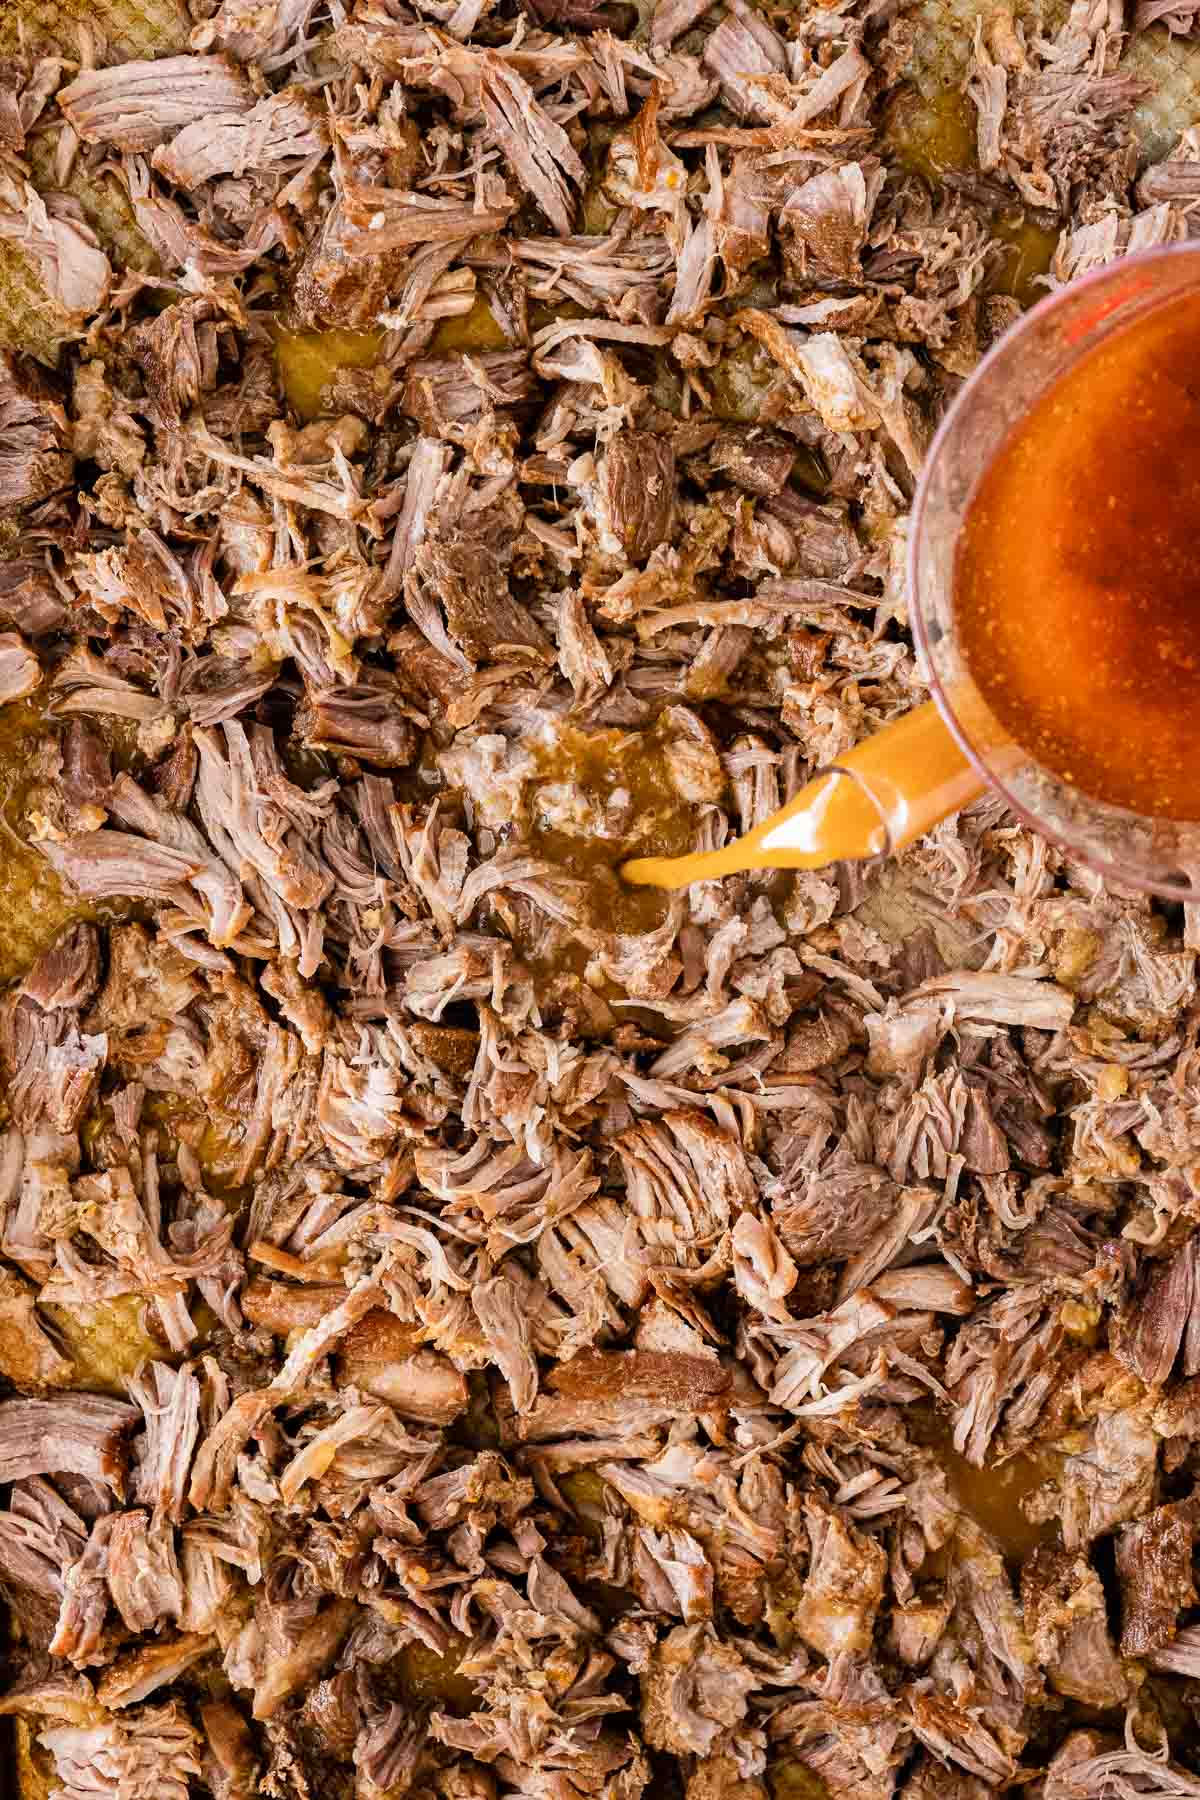 Instant Pot Pork Carnitas pouring cooking juices over shredded meat on baking tray